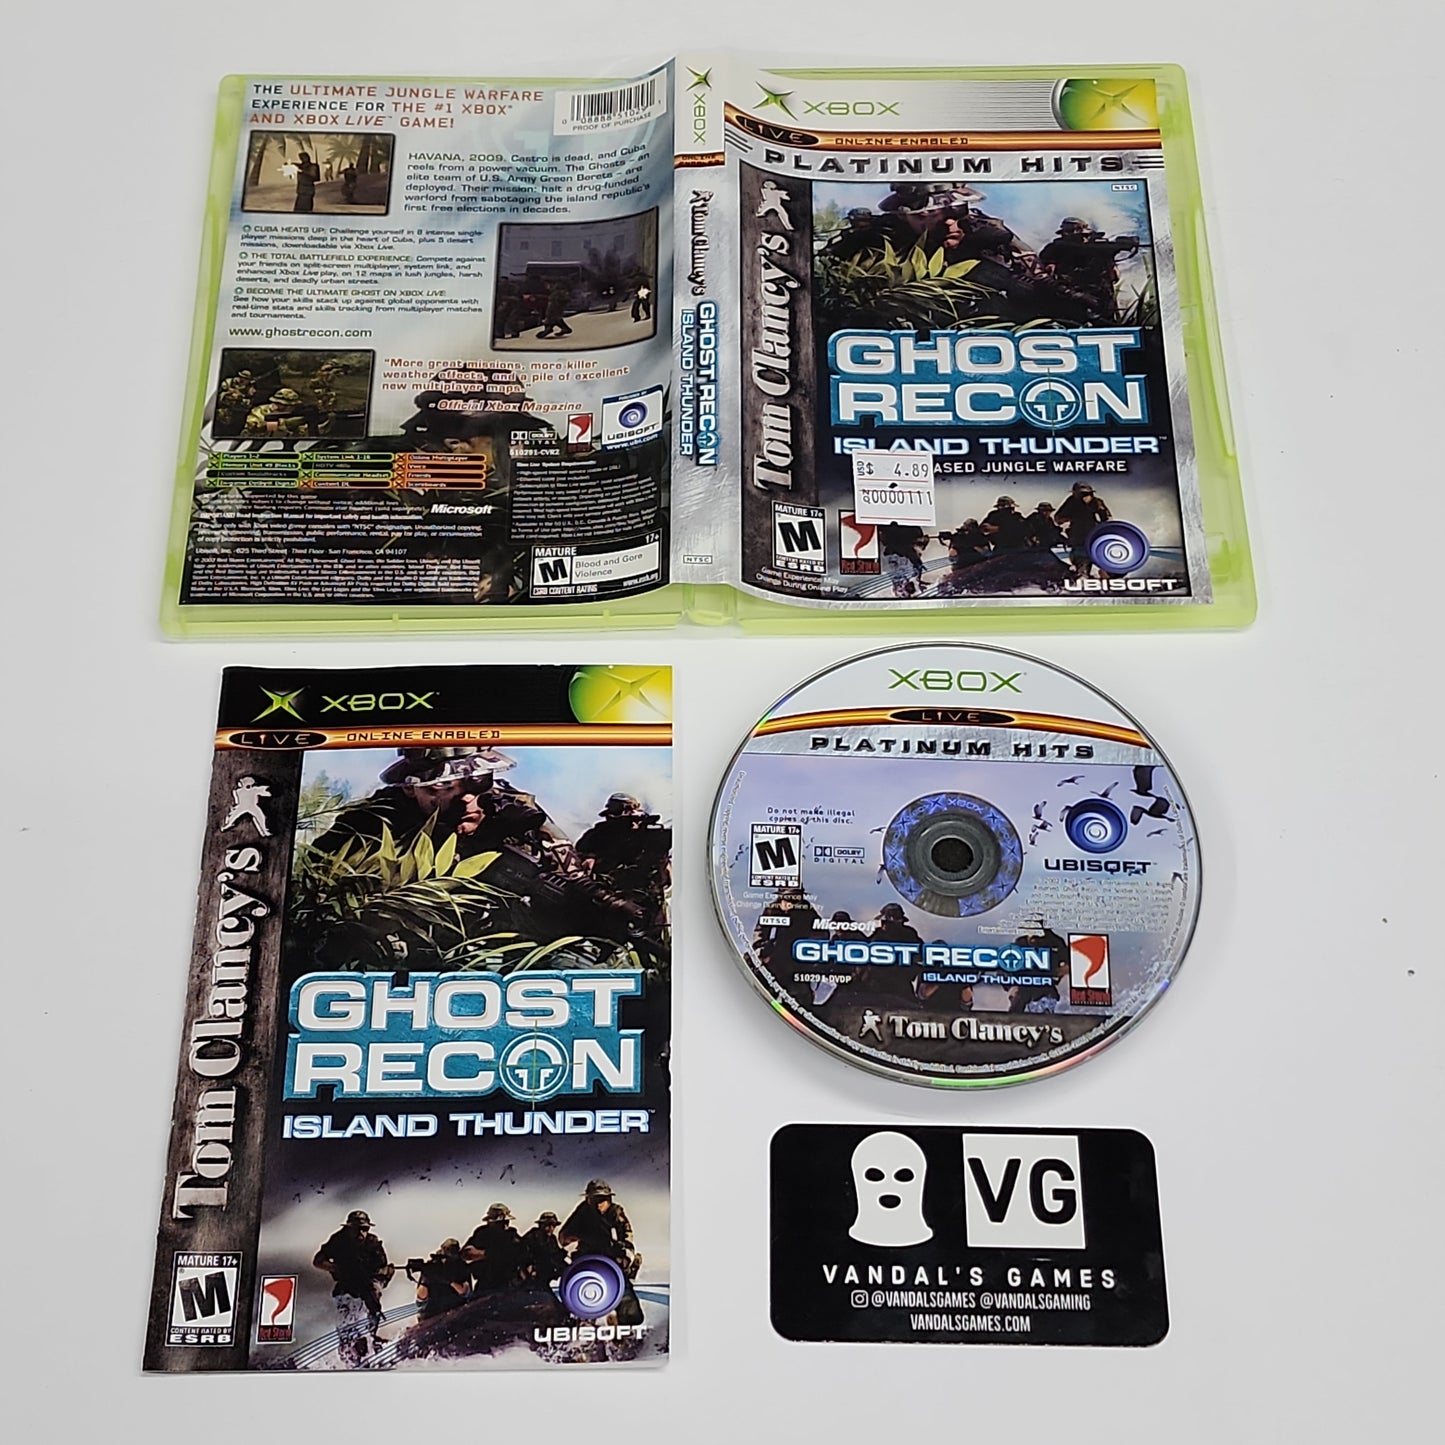 Xbox - Tom Clancy's Ghost Recon Island Thunder Platinum Hits Complete #111